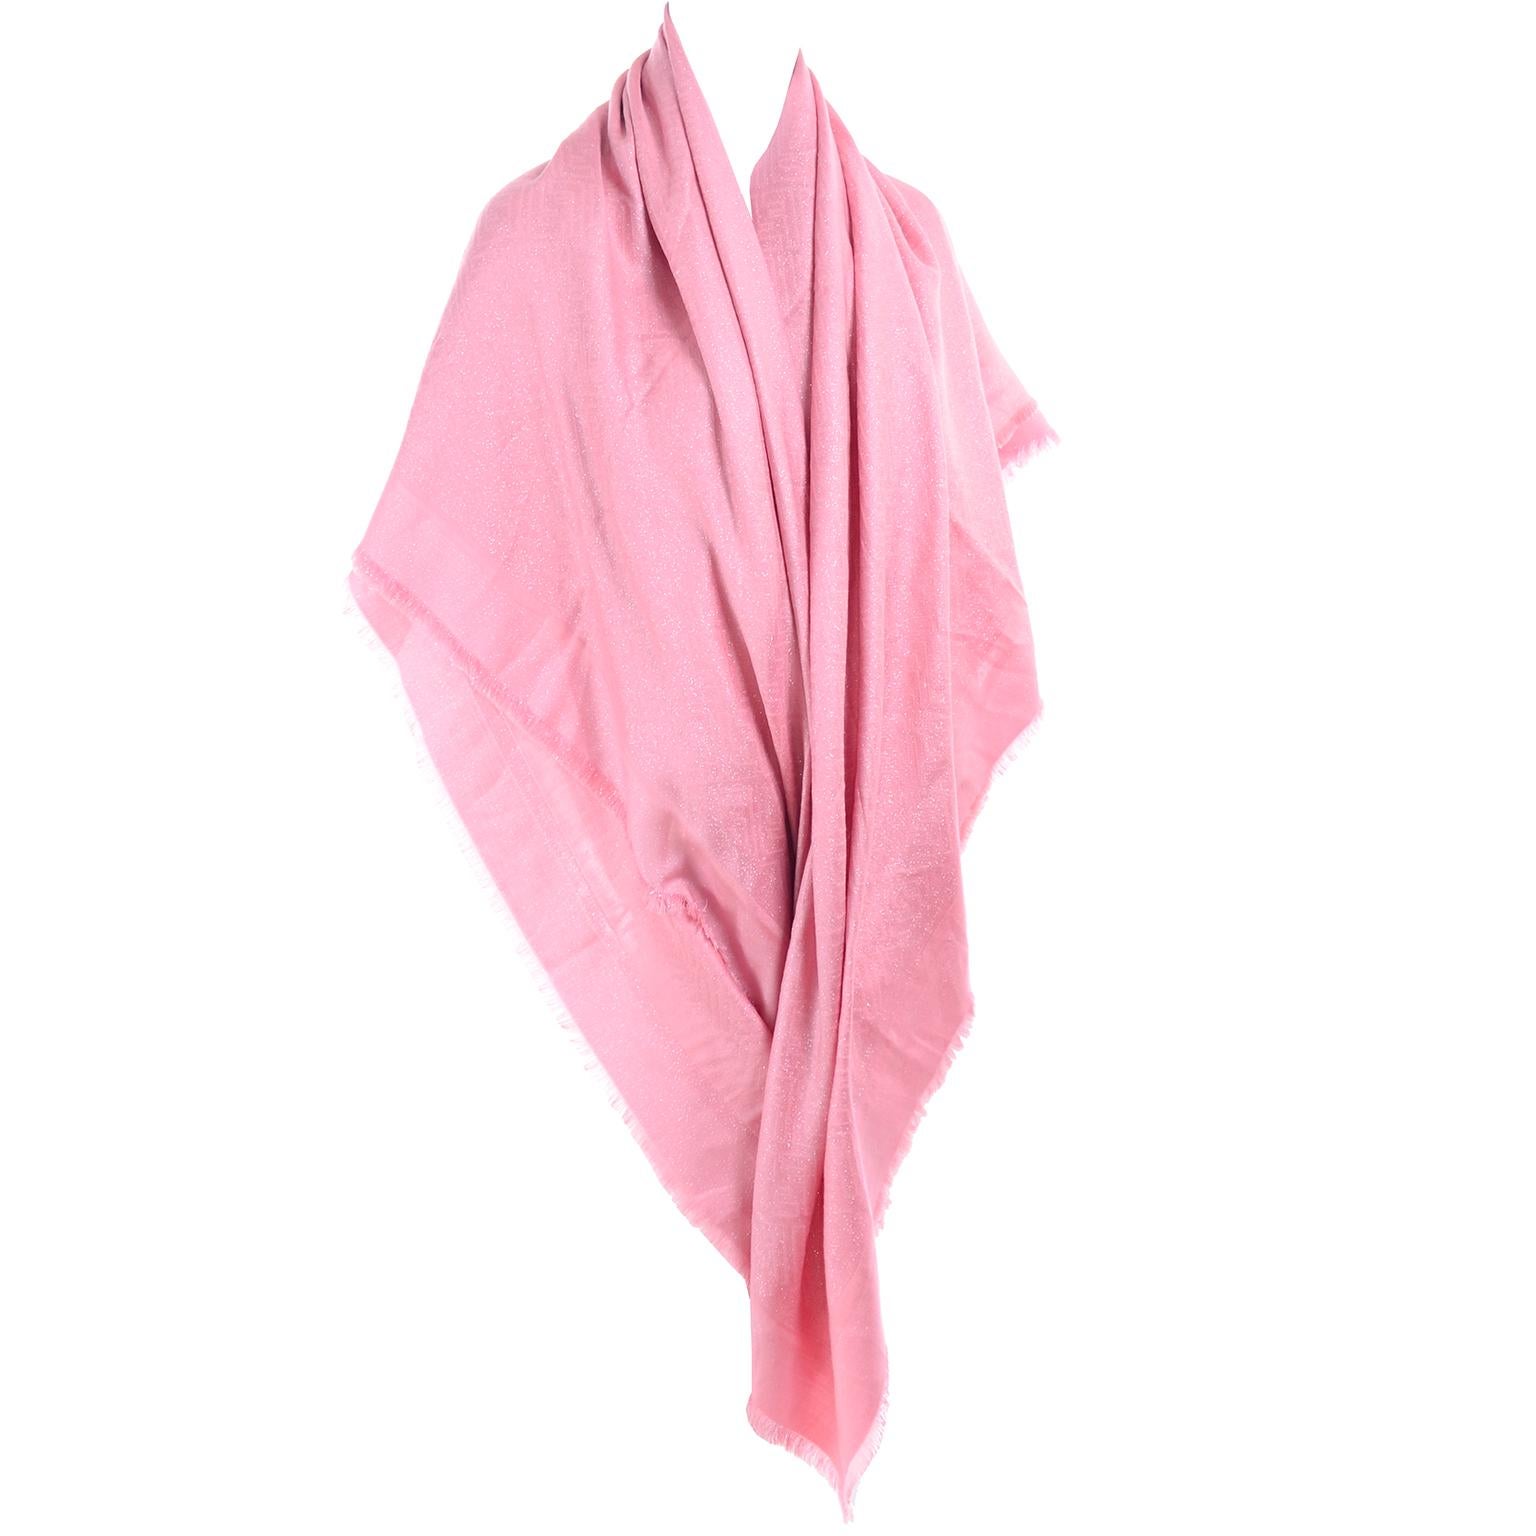 This pink jacquard Fendi scarf would also make a perfect shawl and it was never used! This is a lovely Fendi wrap or scarf that measures 56